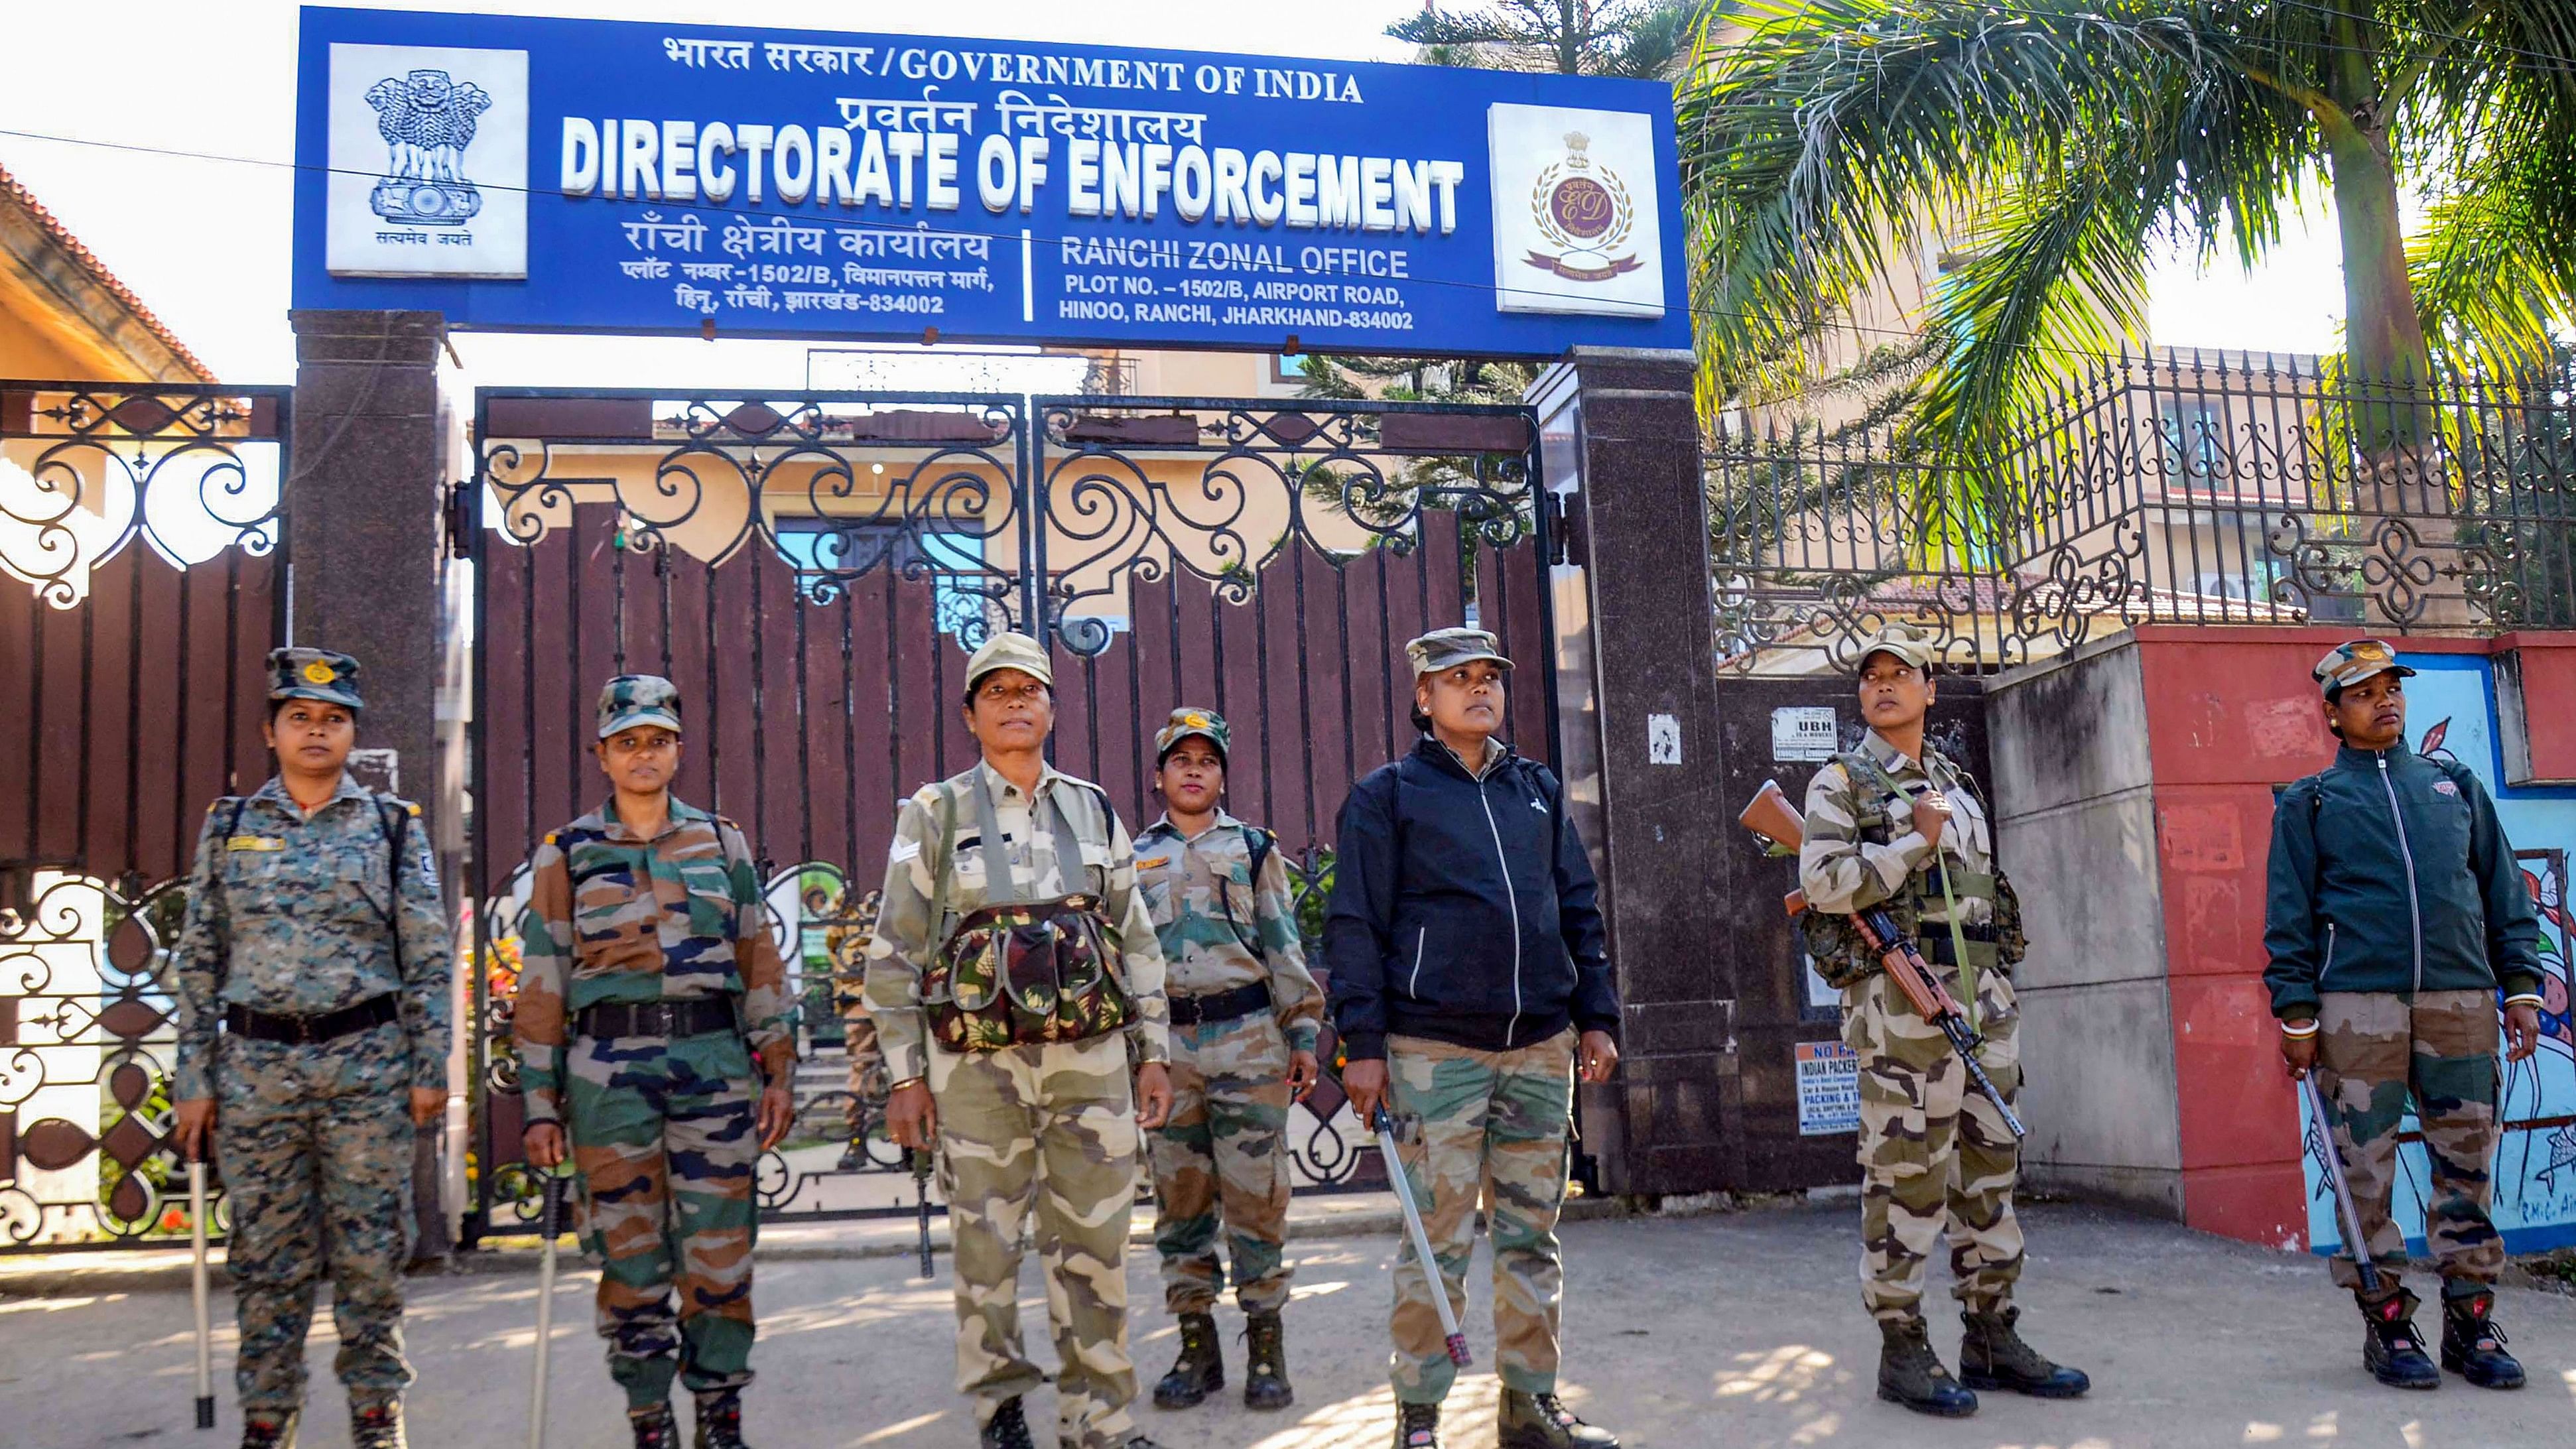 <div class="paragraphs"><p>In this file image, security forces stand guard outside the Ranchi Zonal Office of the Directorate of Enforcement.</p></div>